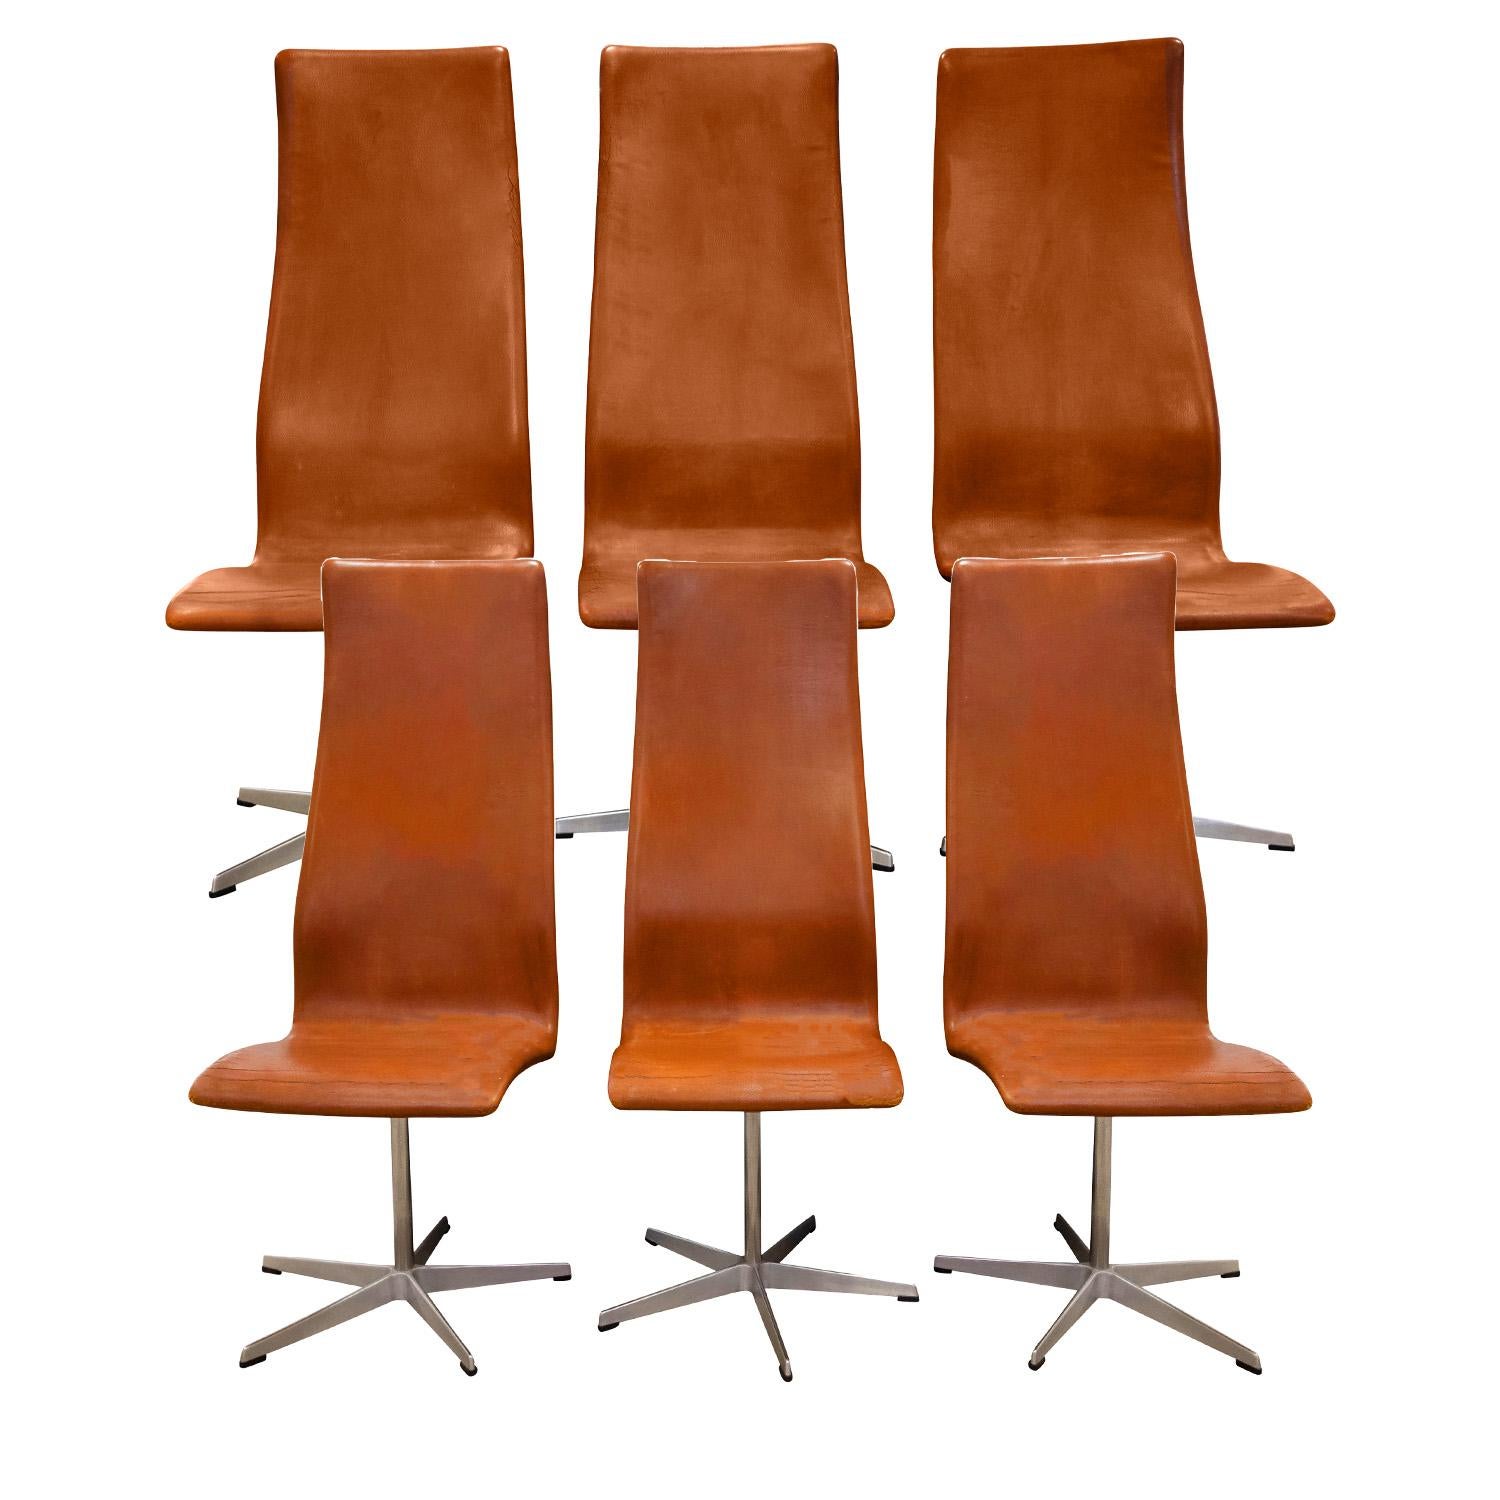 Set of 6 early production high back Oxford dining chairs in original camel leather with steel bases by Arne Jacobson for Fritz Hansen, Denmark 1960's (Signed “FH - Made in Denmark” on faded label on bottom). The original leather has patina and